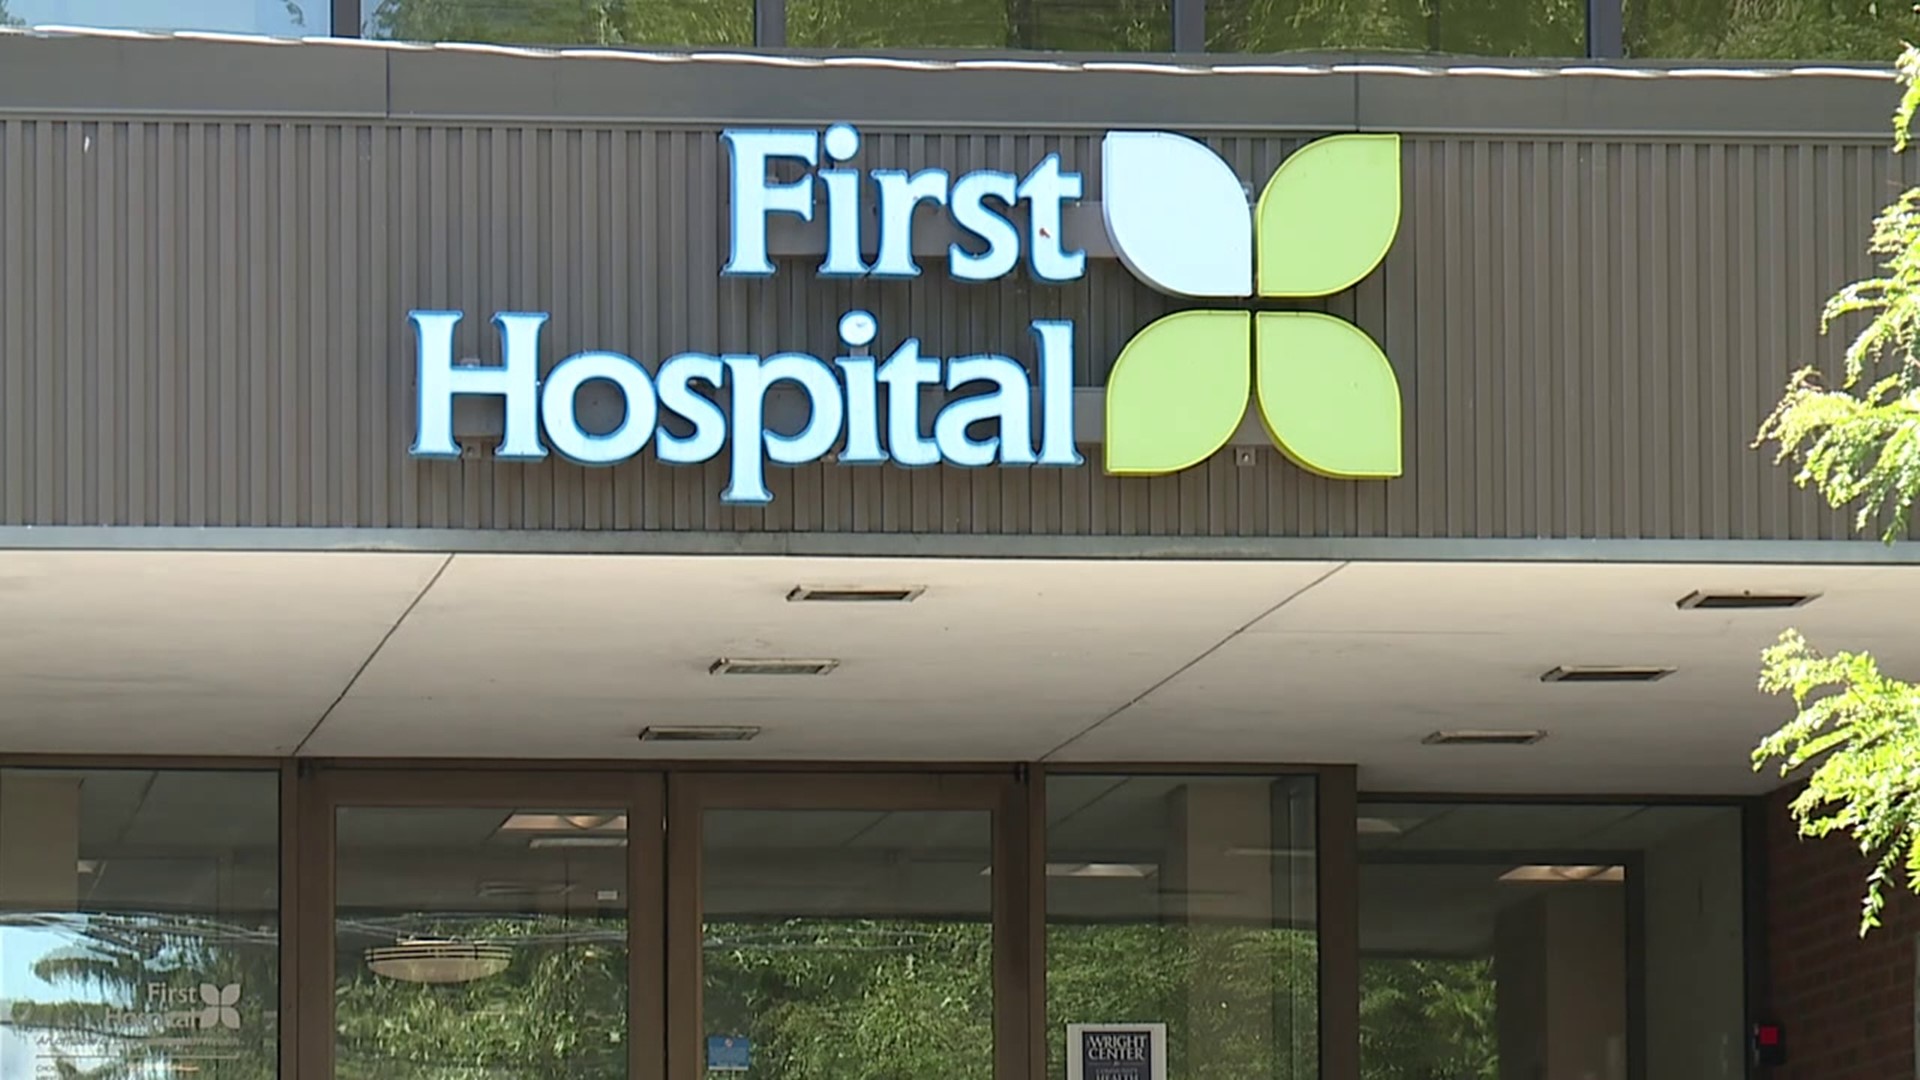 The hospital in Luzerne County has announced plans to close its door on Oct. 30, 2022.